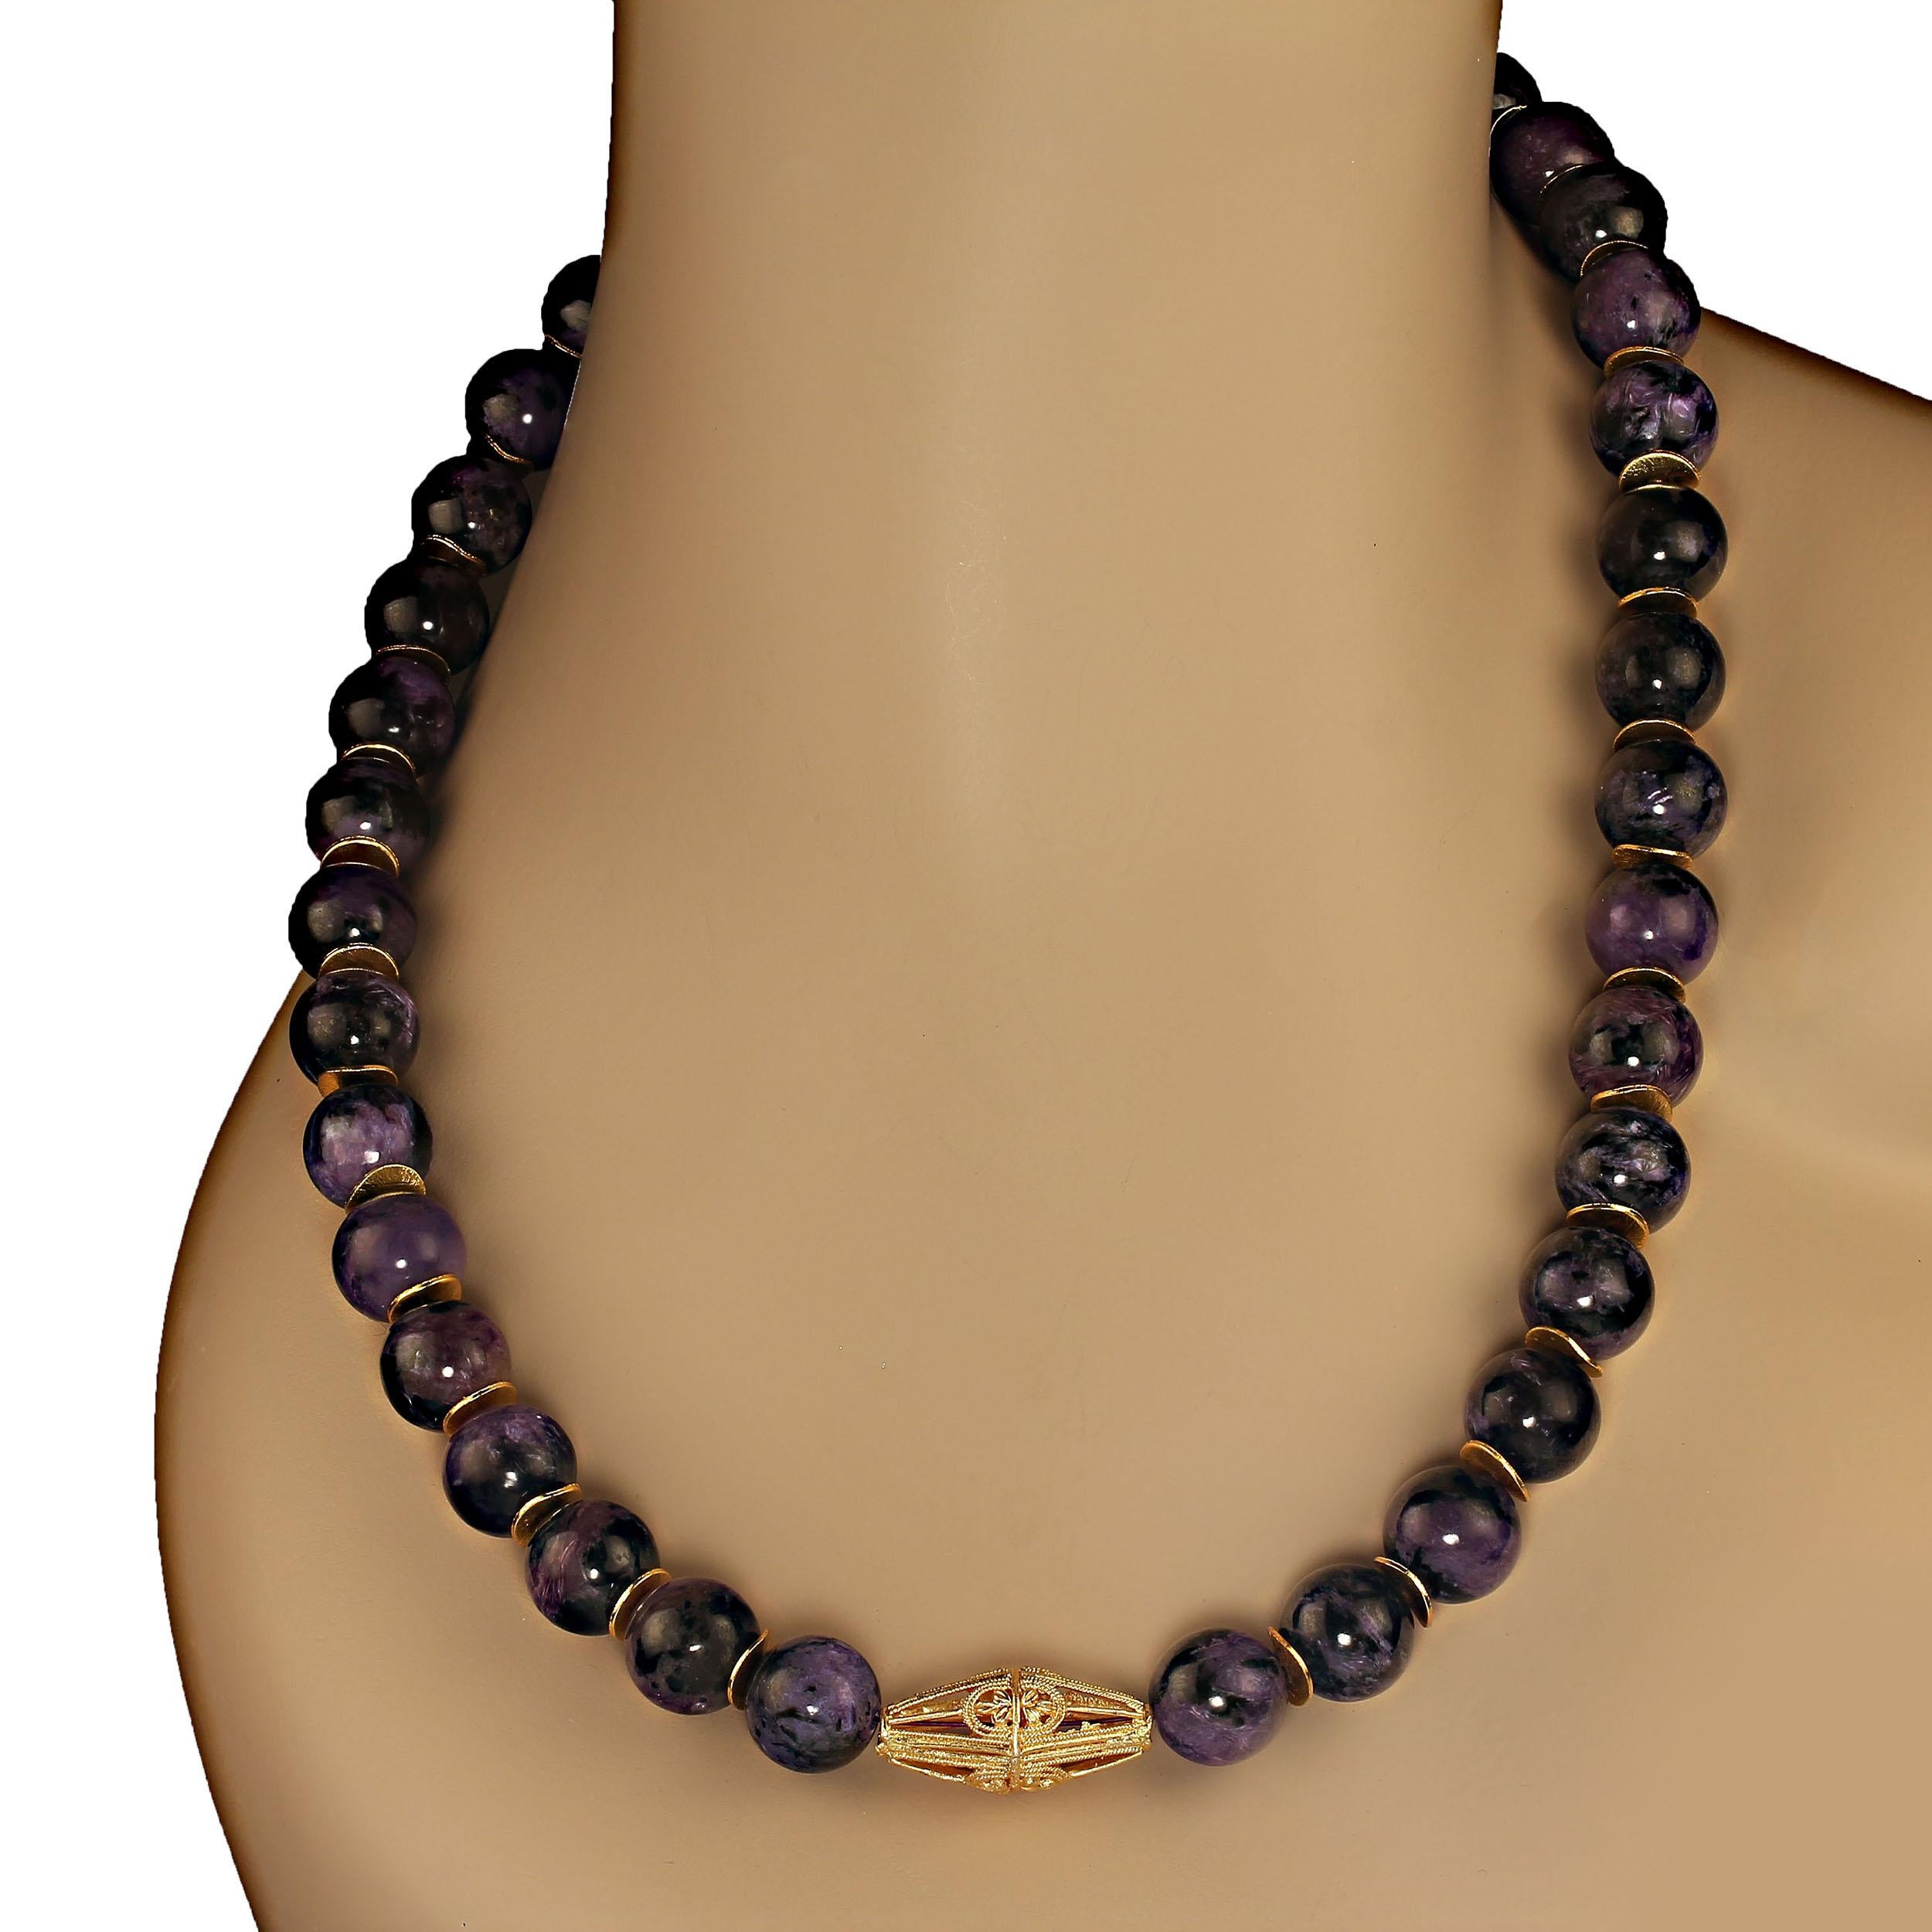 Bead AJD 22 Inch Glowing Charoite with gold tone accents necklace     Great Gift! For Sale